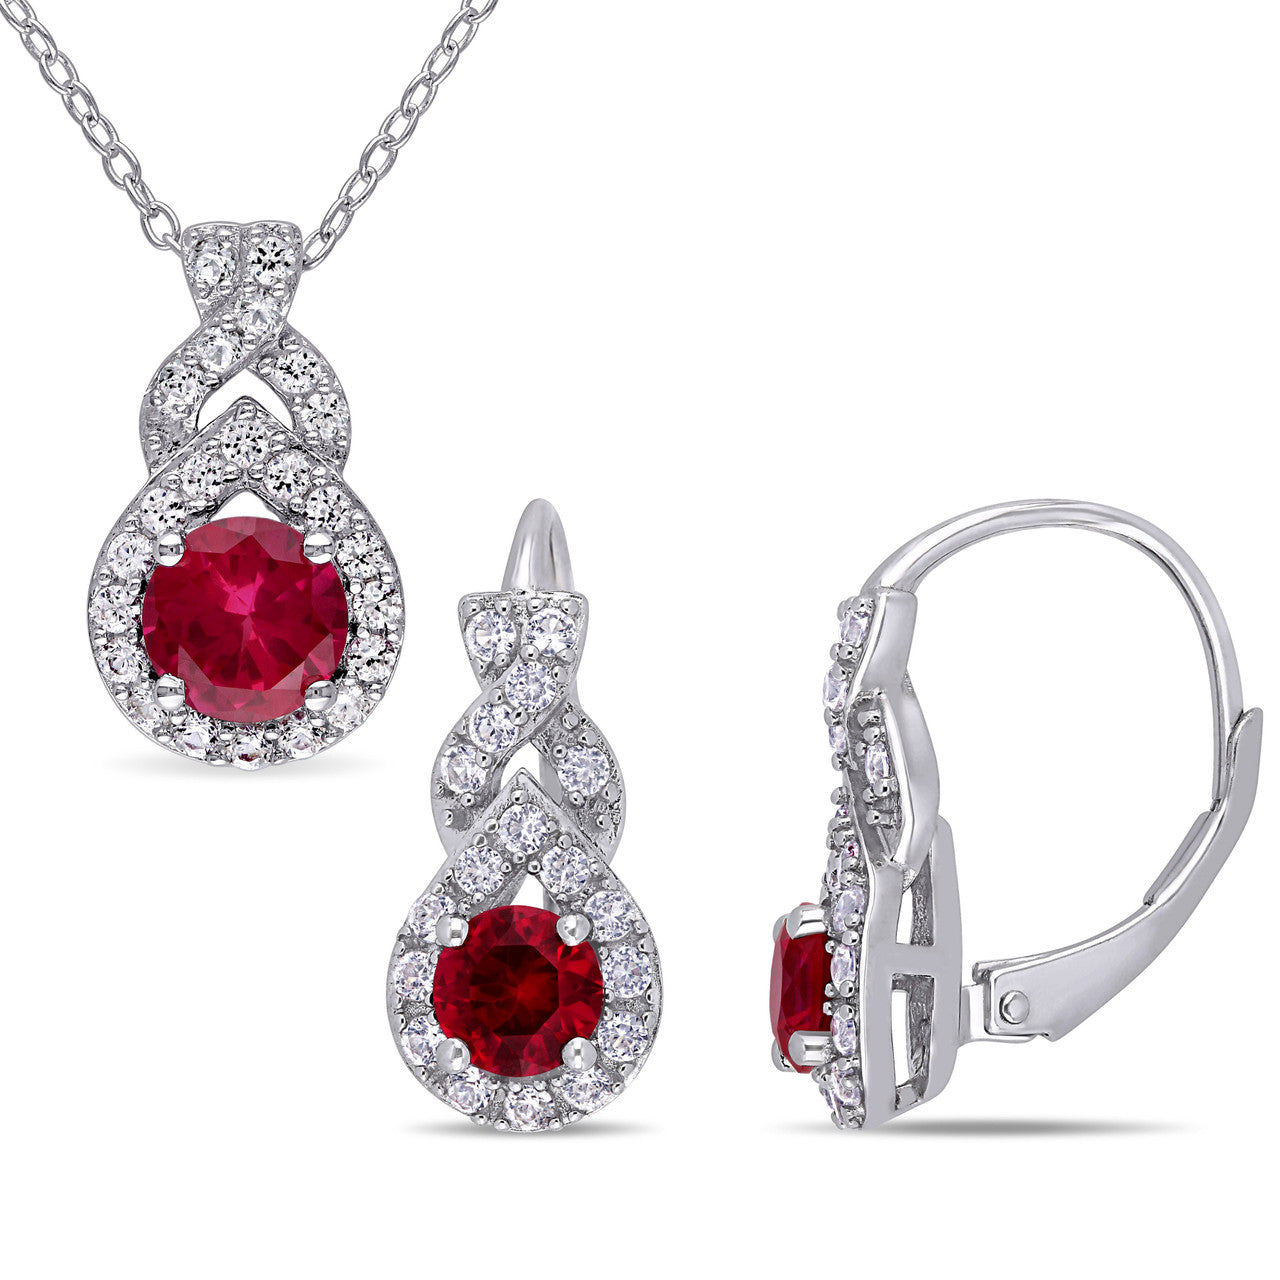 Ice Jewellery 2 PC SET OF 3 5/8 CT TGW Created White Sapphire Created Ruby Earrings & Pendant w/chain in Sterling Silver - 75000004948 | Ice Jewellery Australia